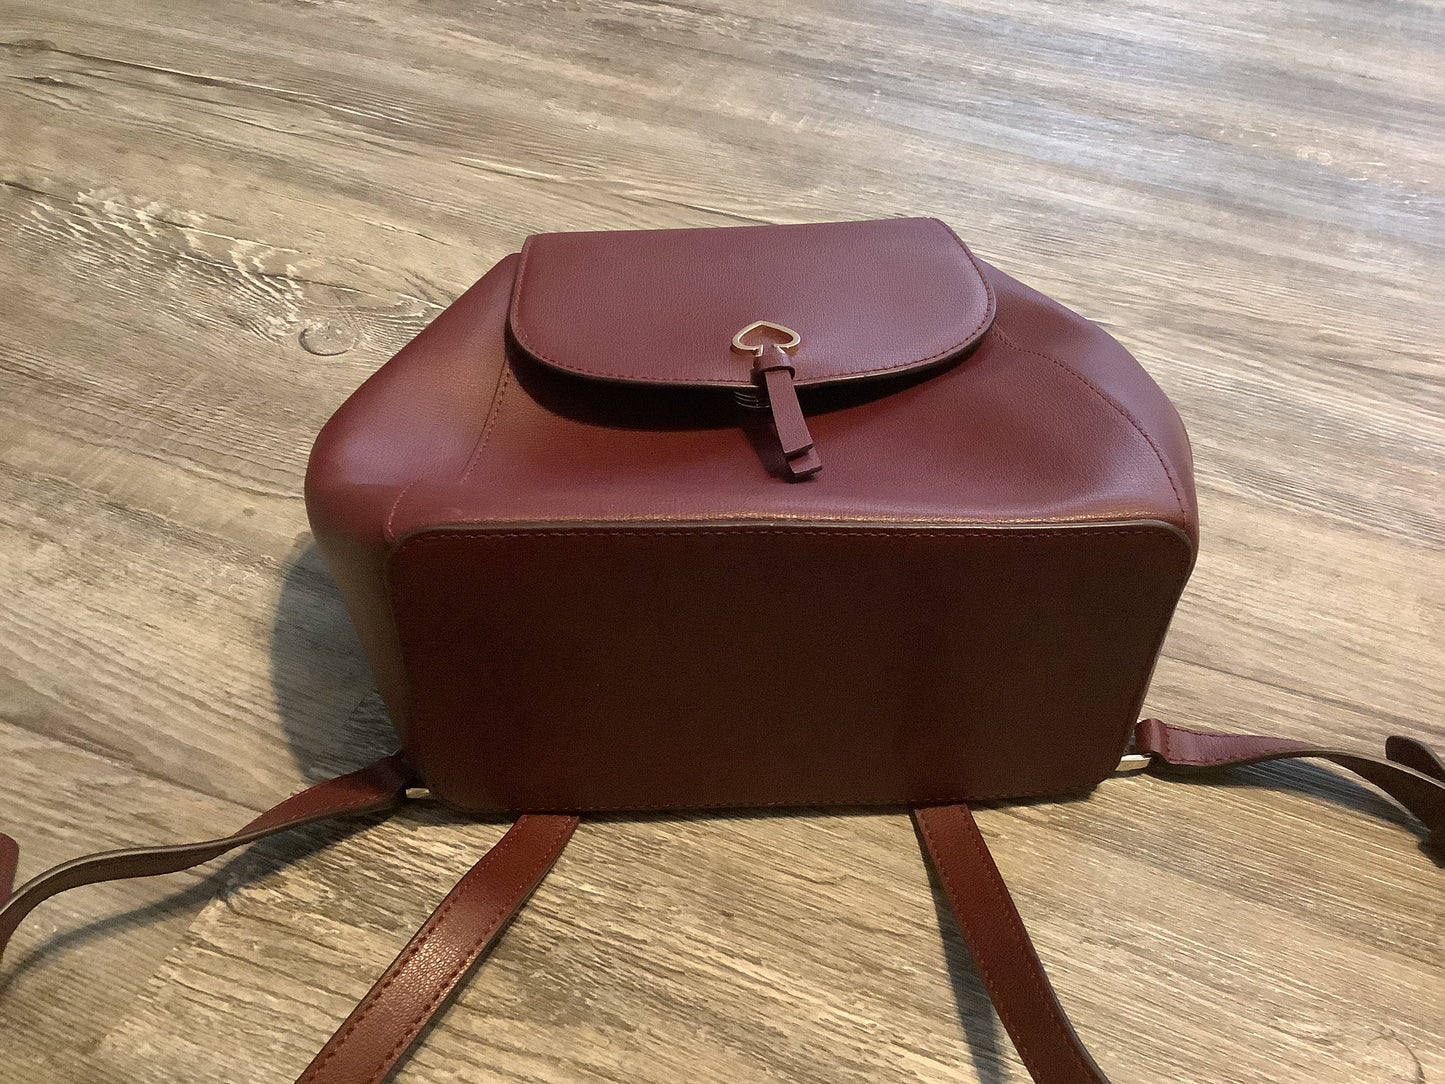 Backpack Kate Spade, Size Small